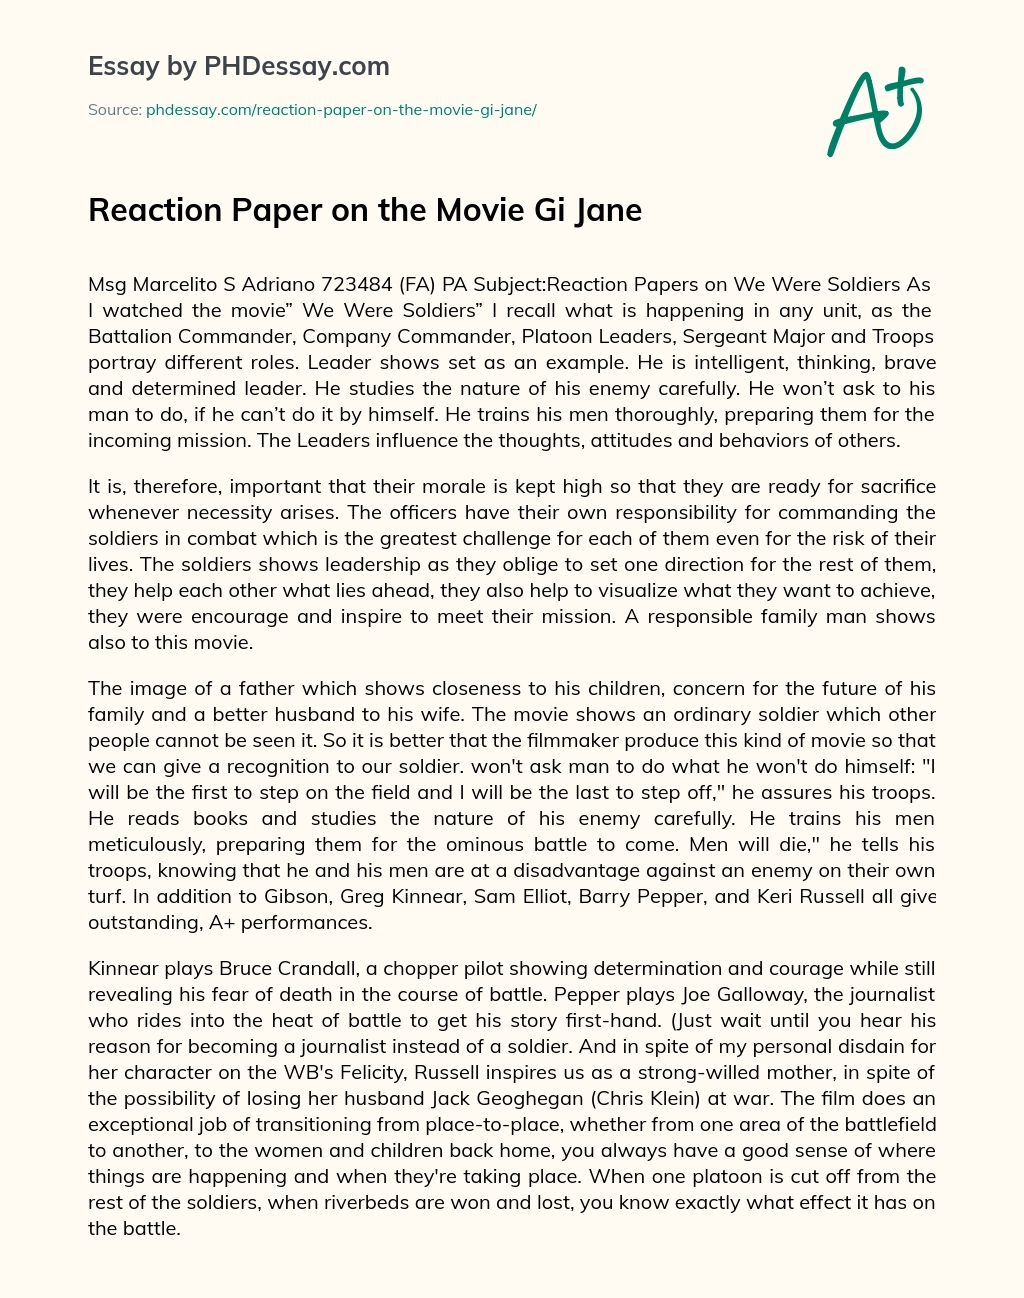 Reaction Paper on the Movie Gi Jane essay